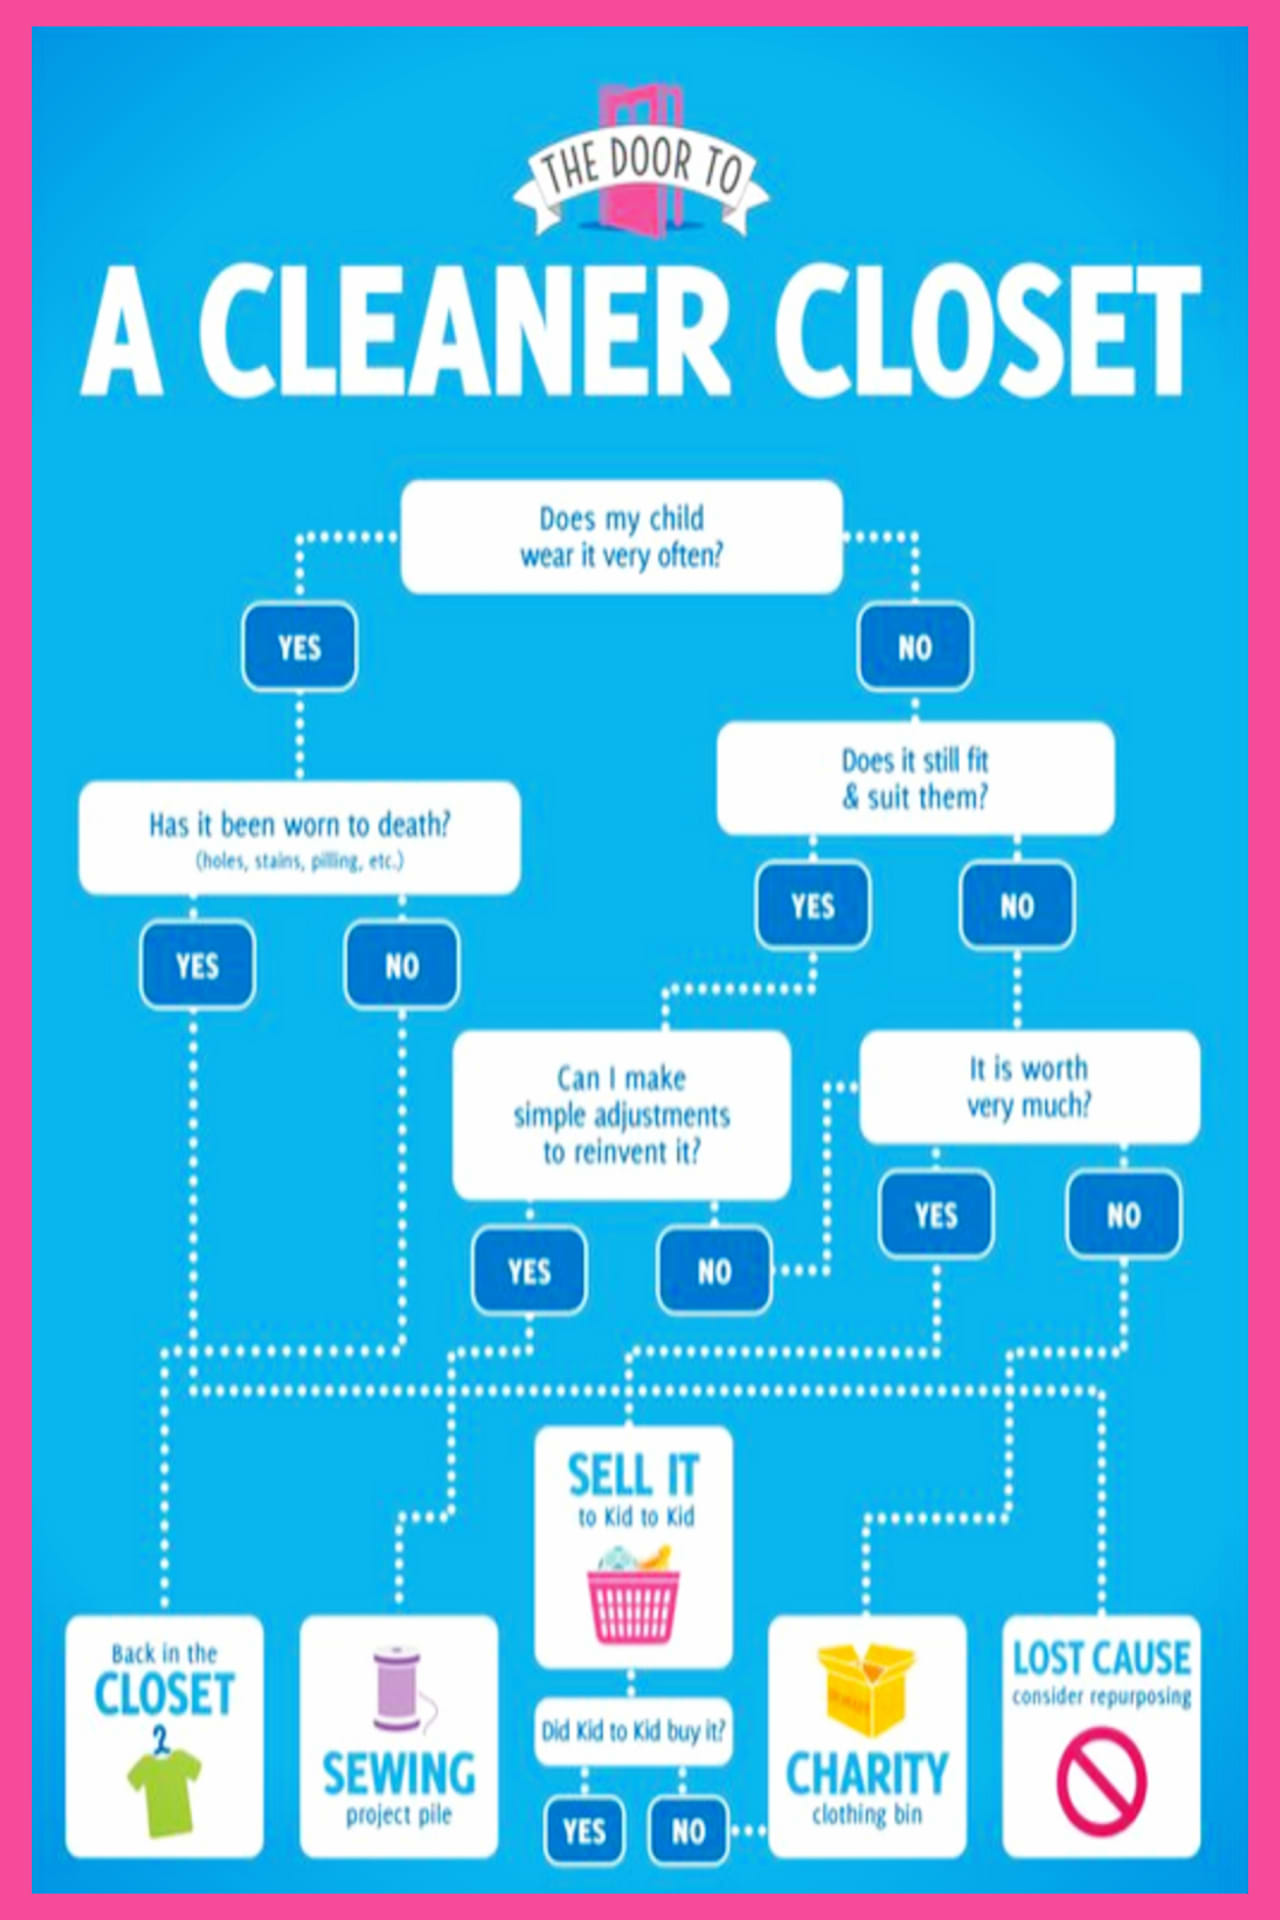 Closet organization on a budget -Clean out closet checklist to declutter and organize any closet on a budget - kids closet organization ideas and organizing tips